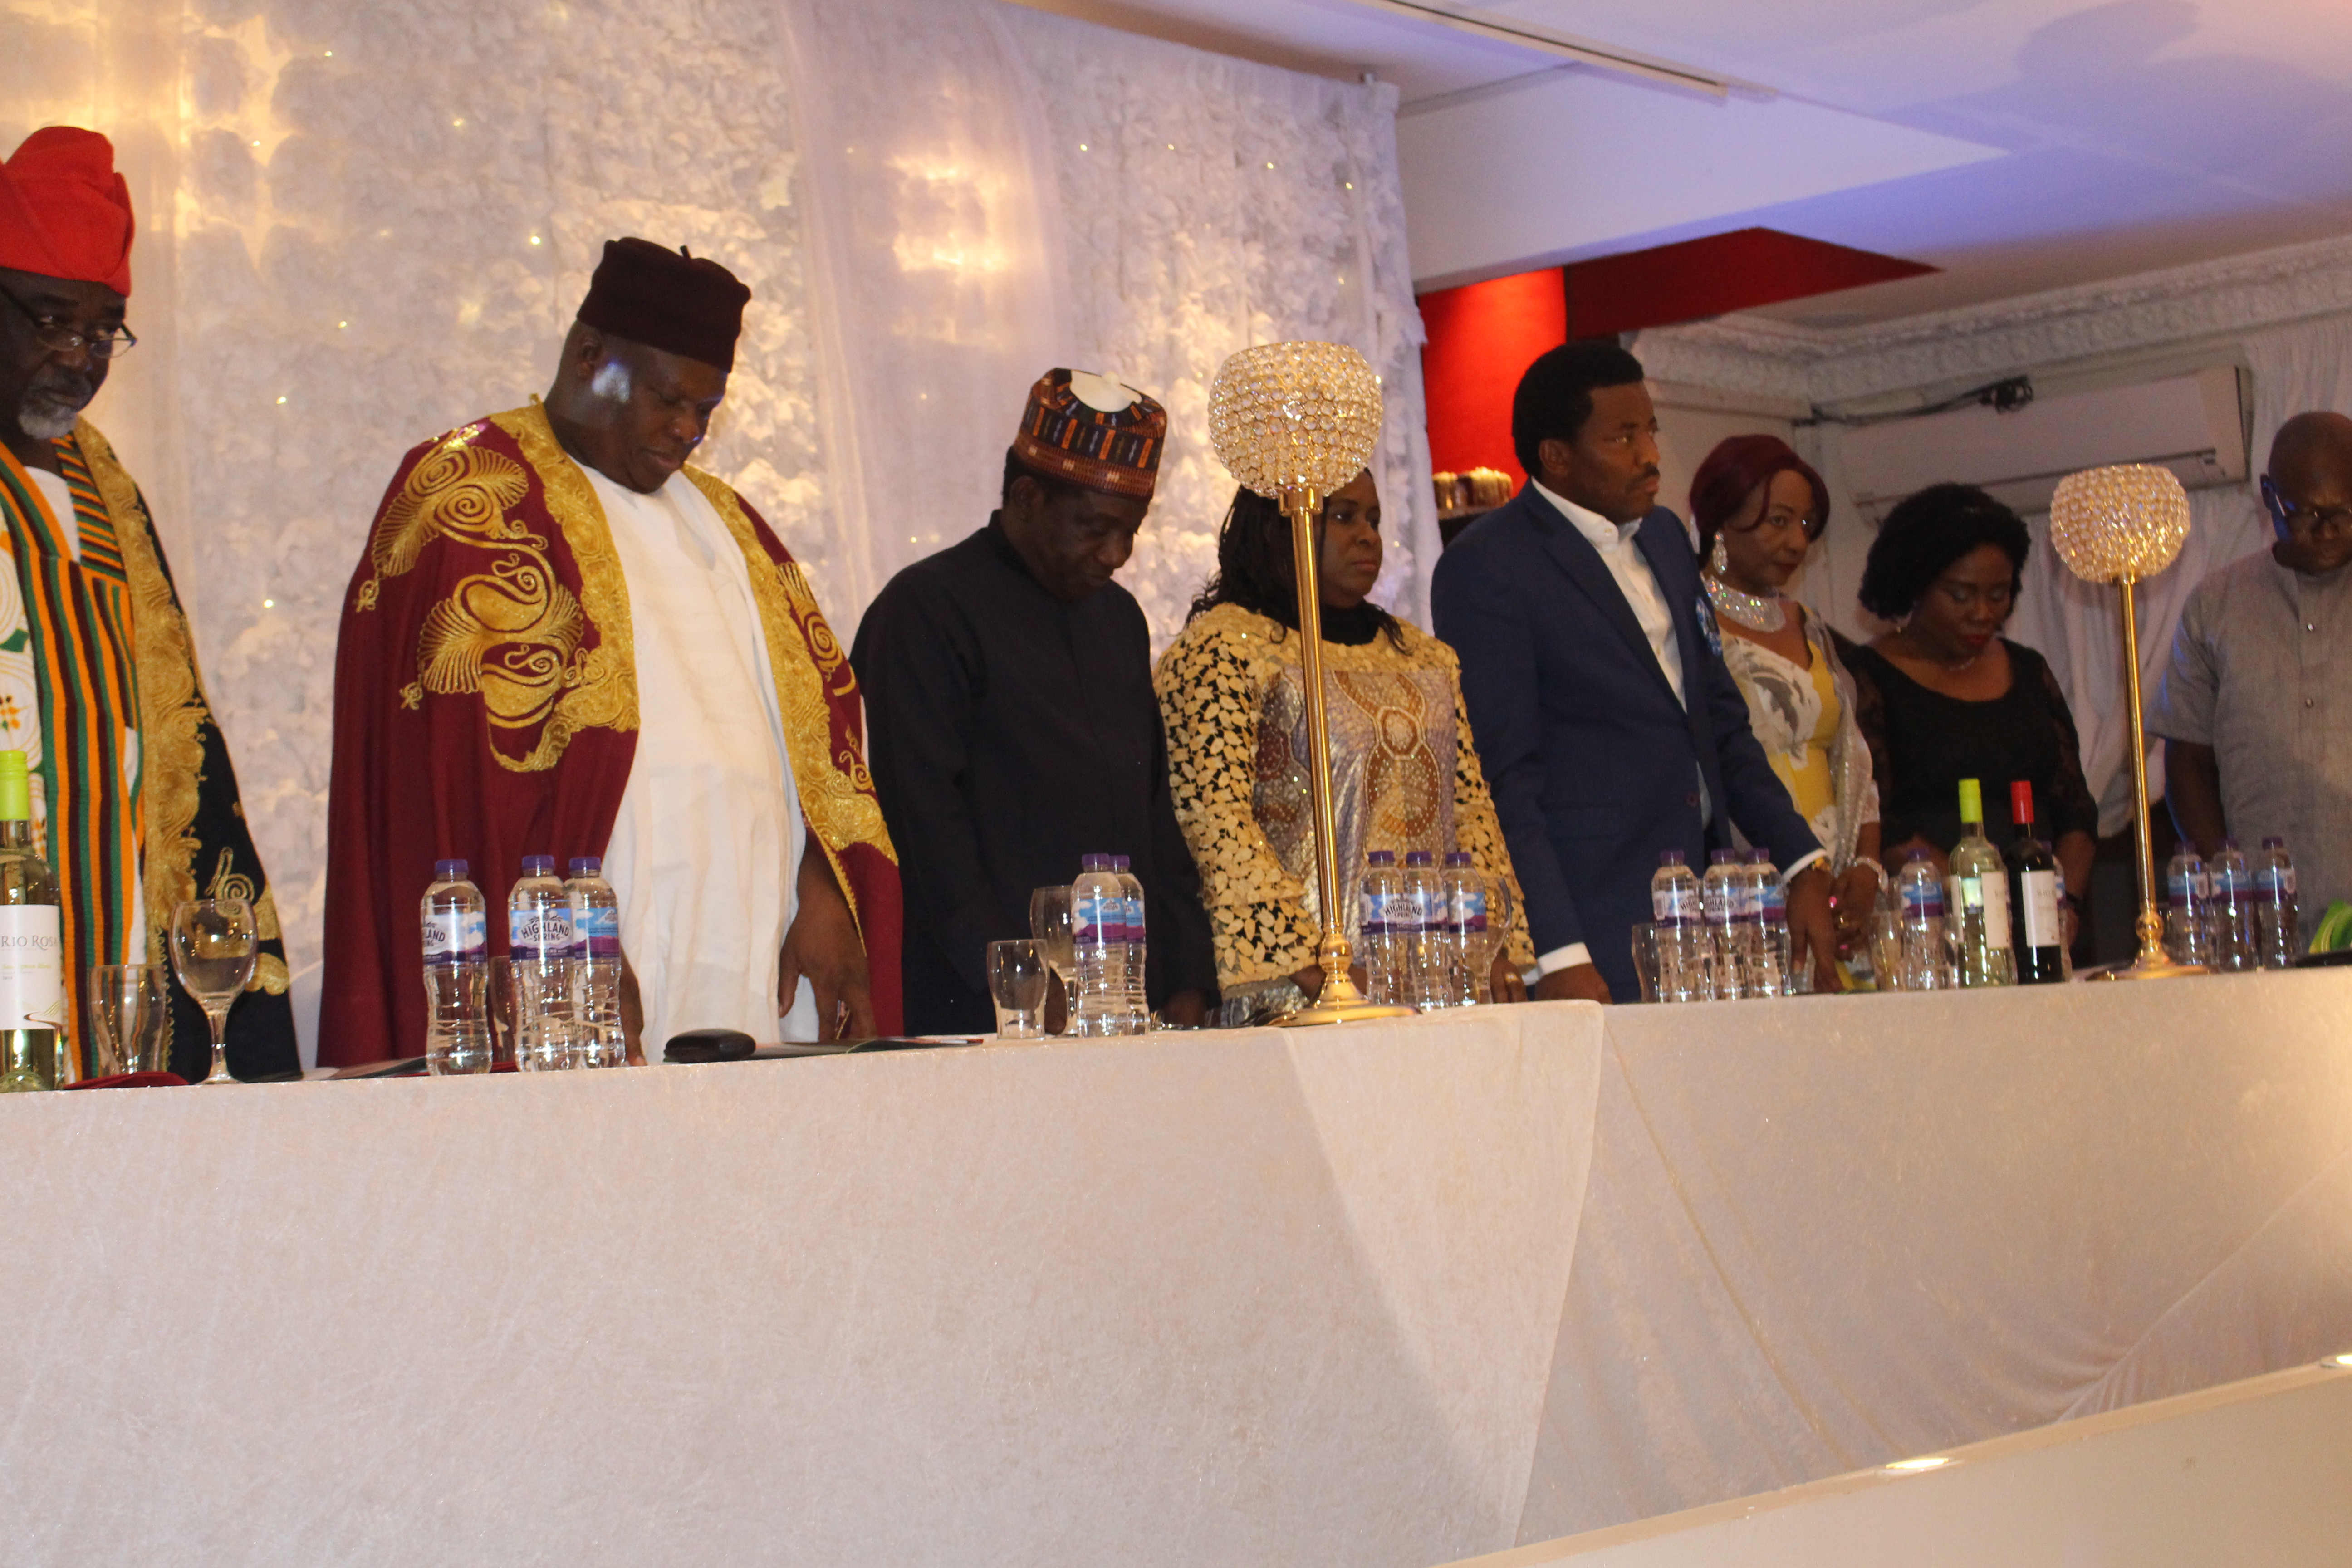 Pictures: Gov Lalong Leads From the Front, Mobilises Friends & Associates for PSA UK Fund Raising